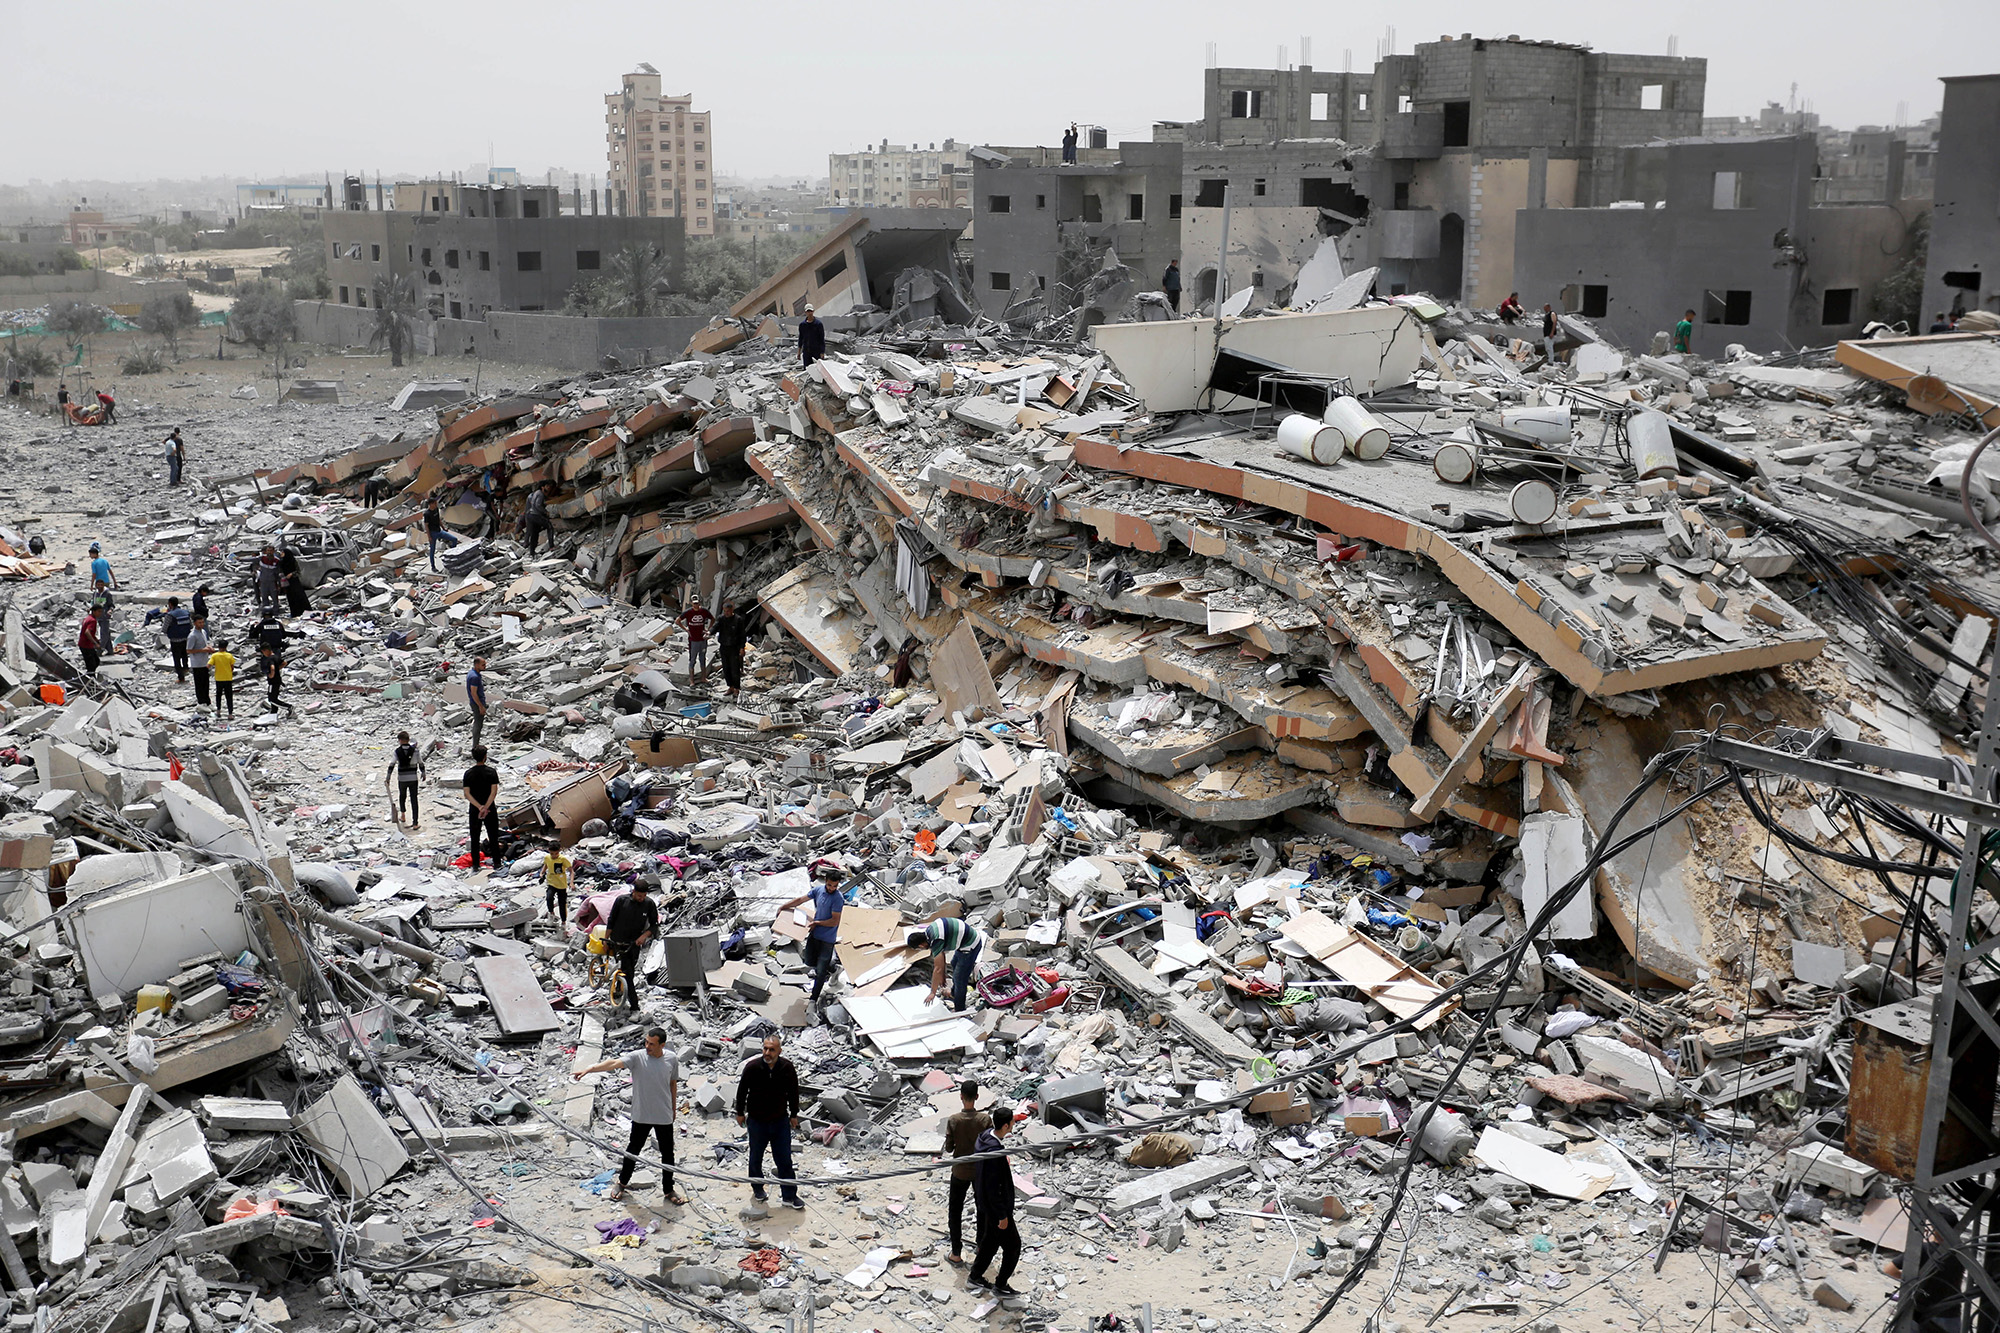 Palestinians living in Nuseirat Refugee Camp collect the usable items among the rubble of the destroyed buildings after Israel withdrawal from northern Nuseirat Camp in Deir Al Balah, Gaza, on April 18.